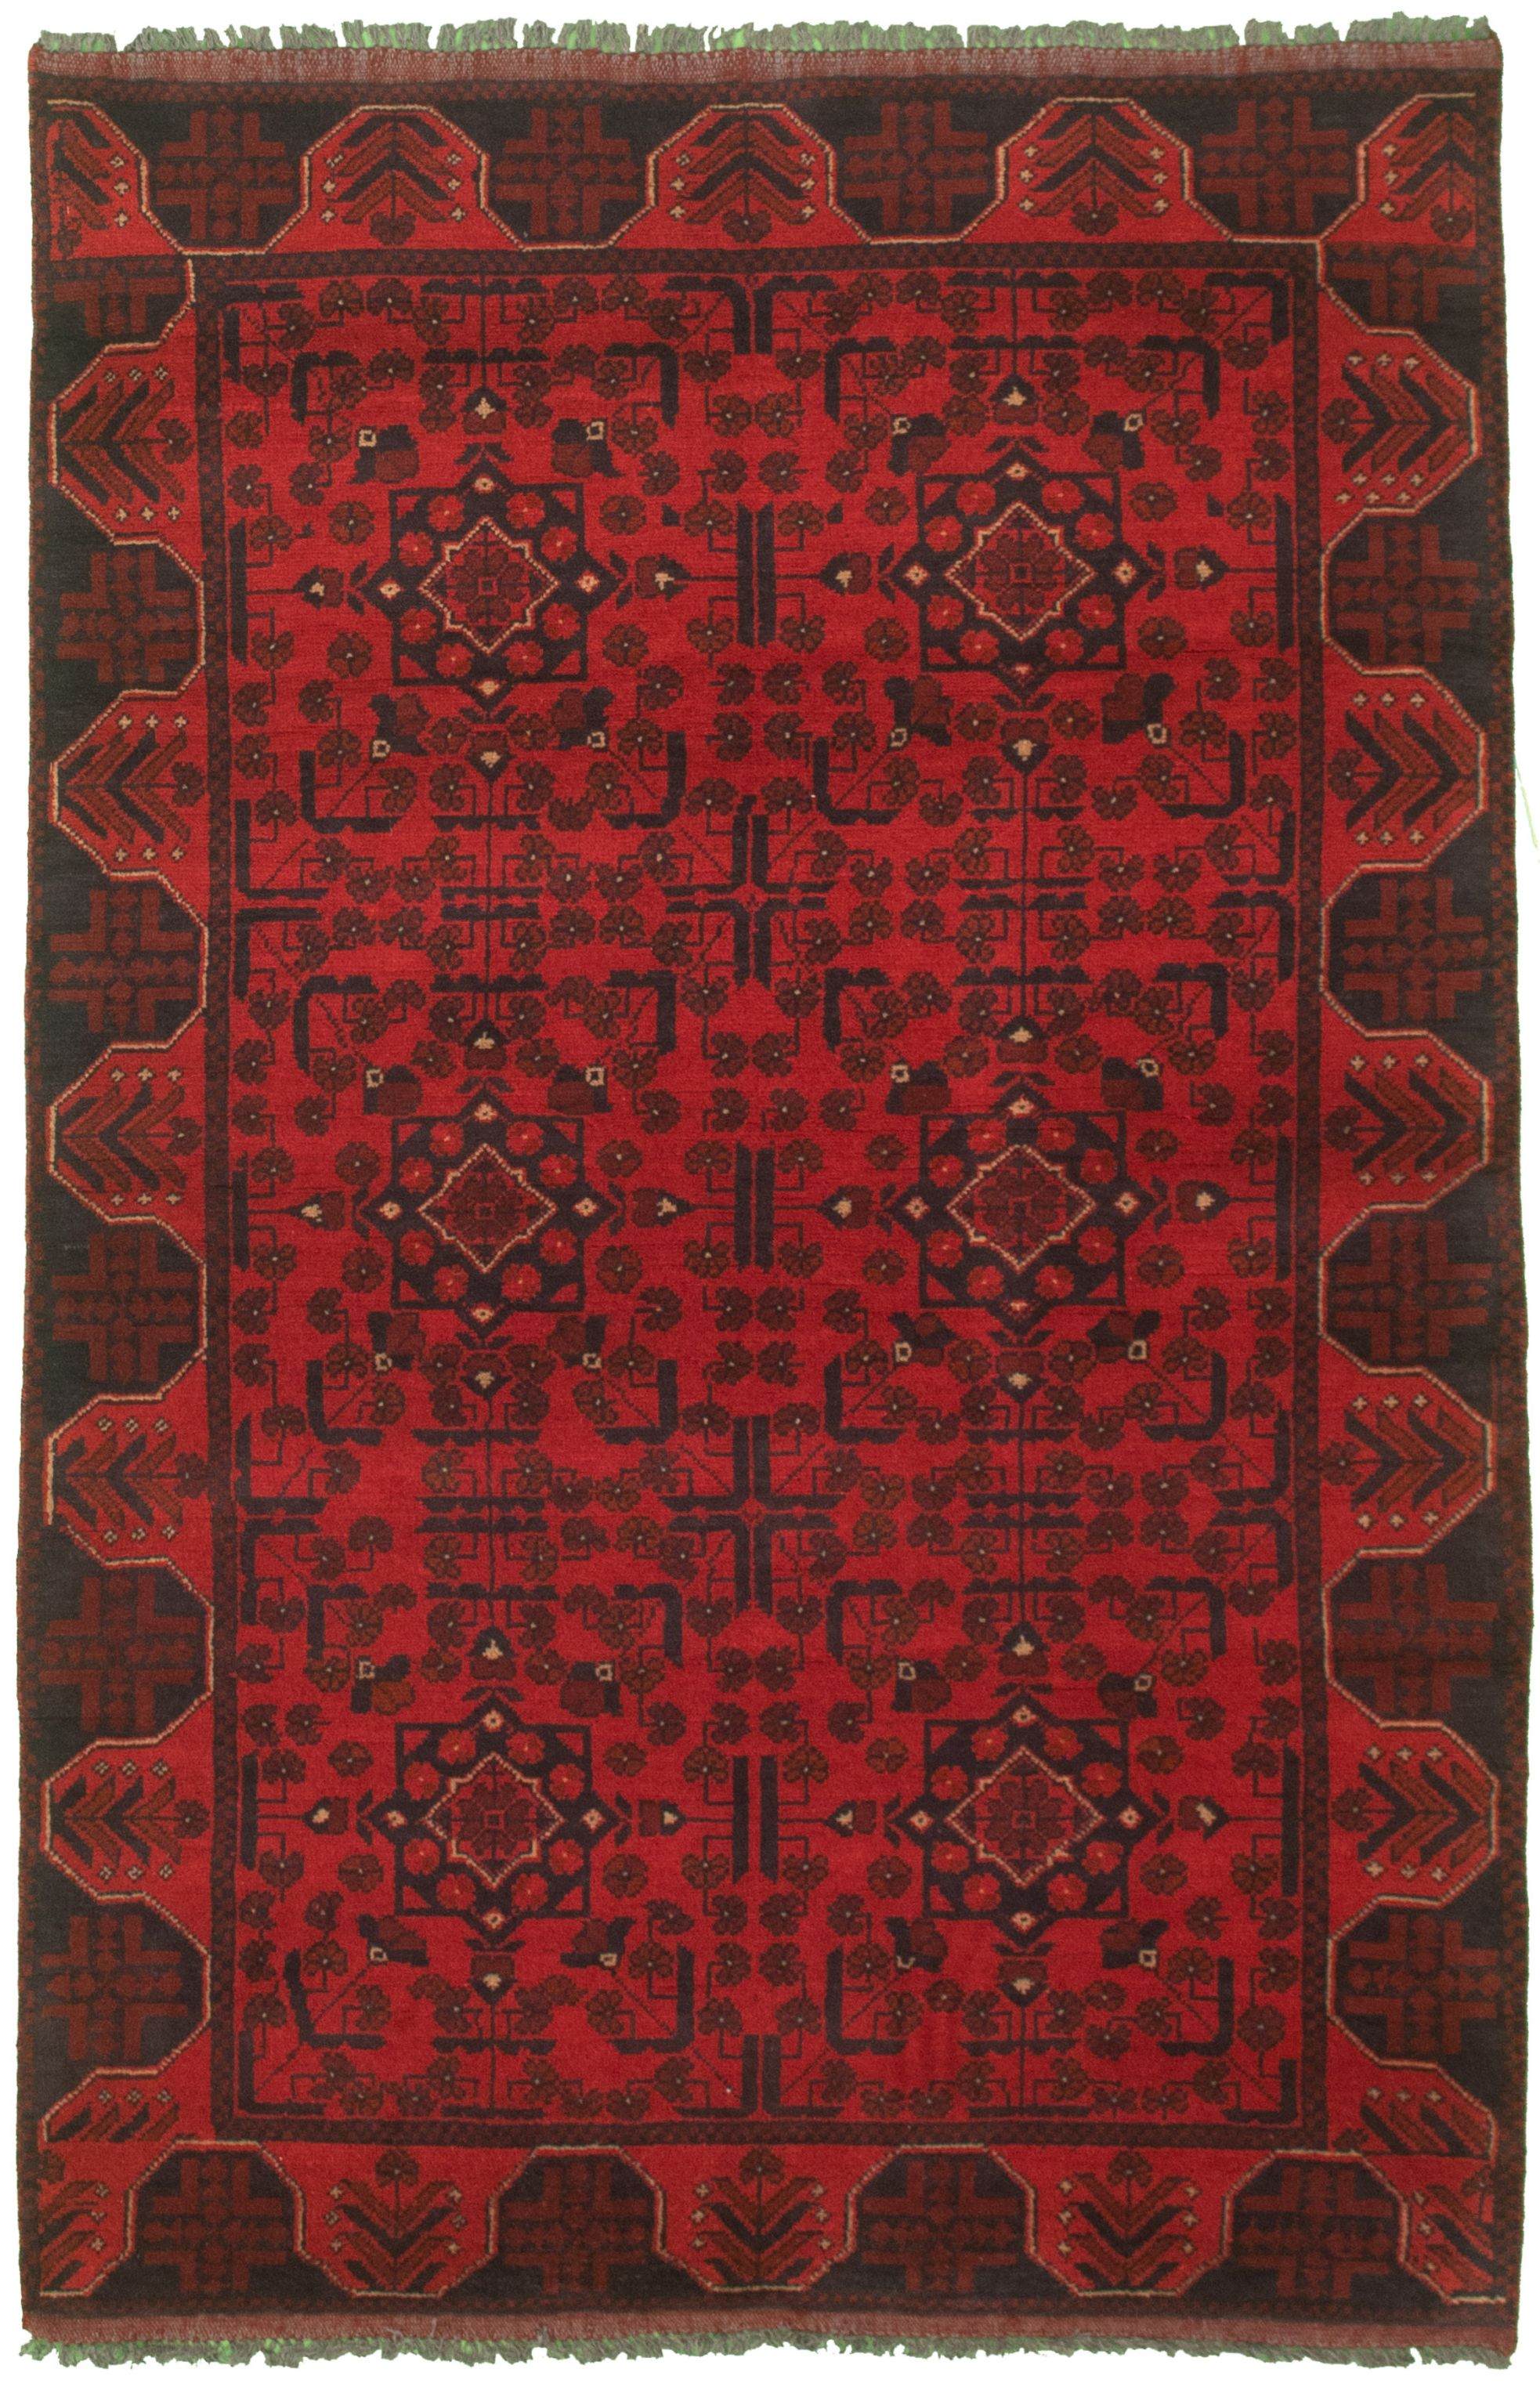 Hand-knotted Finest Khal Mohammadi Red Wool Rug 4'2" x 6'7"  Size: 4'2" x 6'7"  